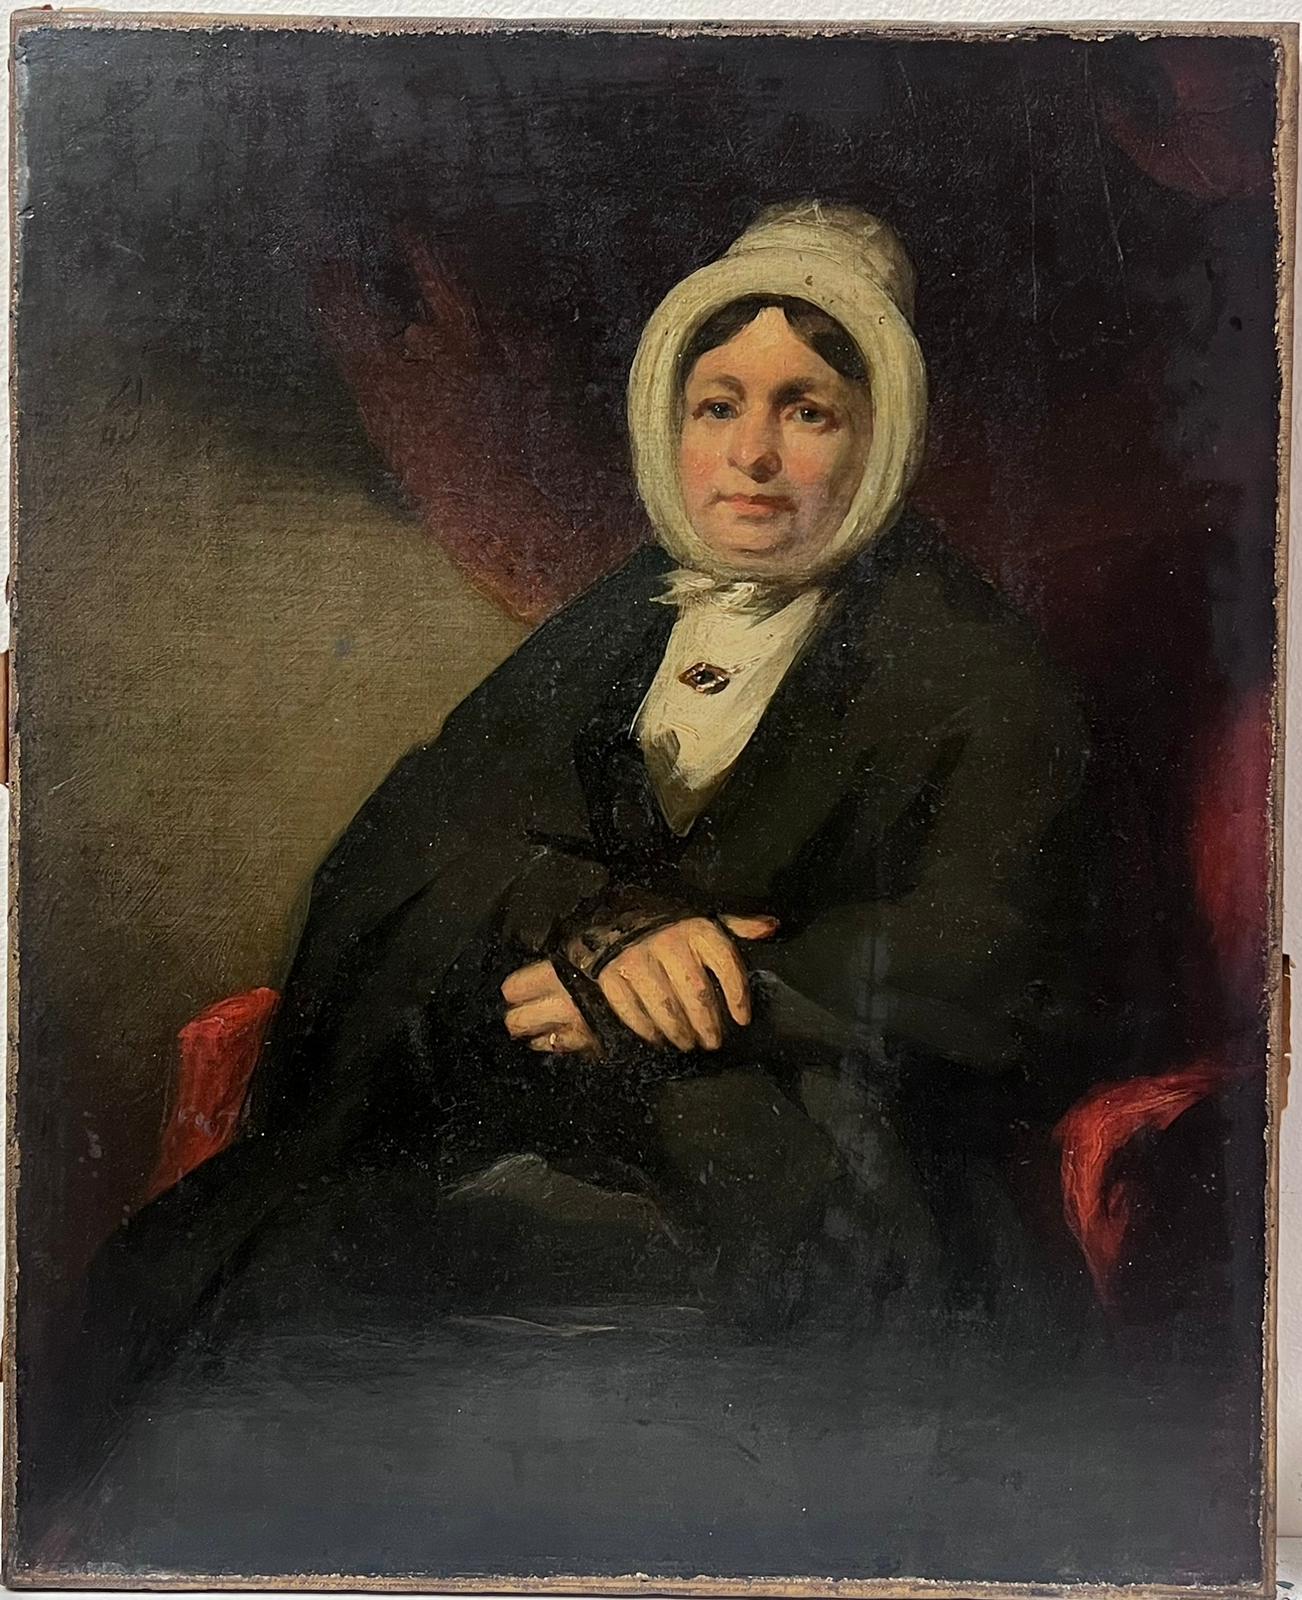 Portrait of a Seated Lady
English School, mid 19th century
oil on canvas, unframed
canvas: 16 x 13 inches
provenance: private collection, England
condition: good and sound condition 